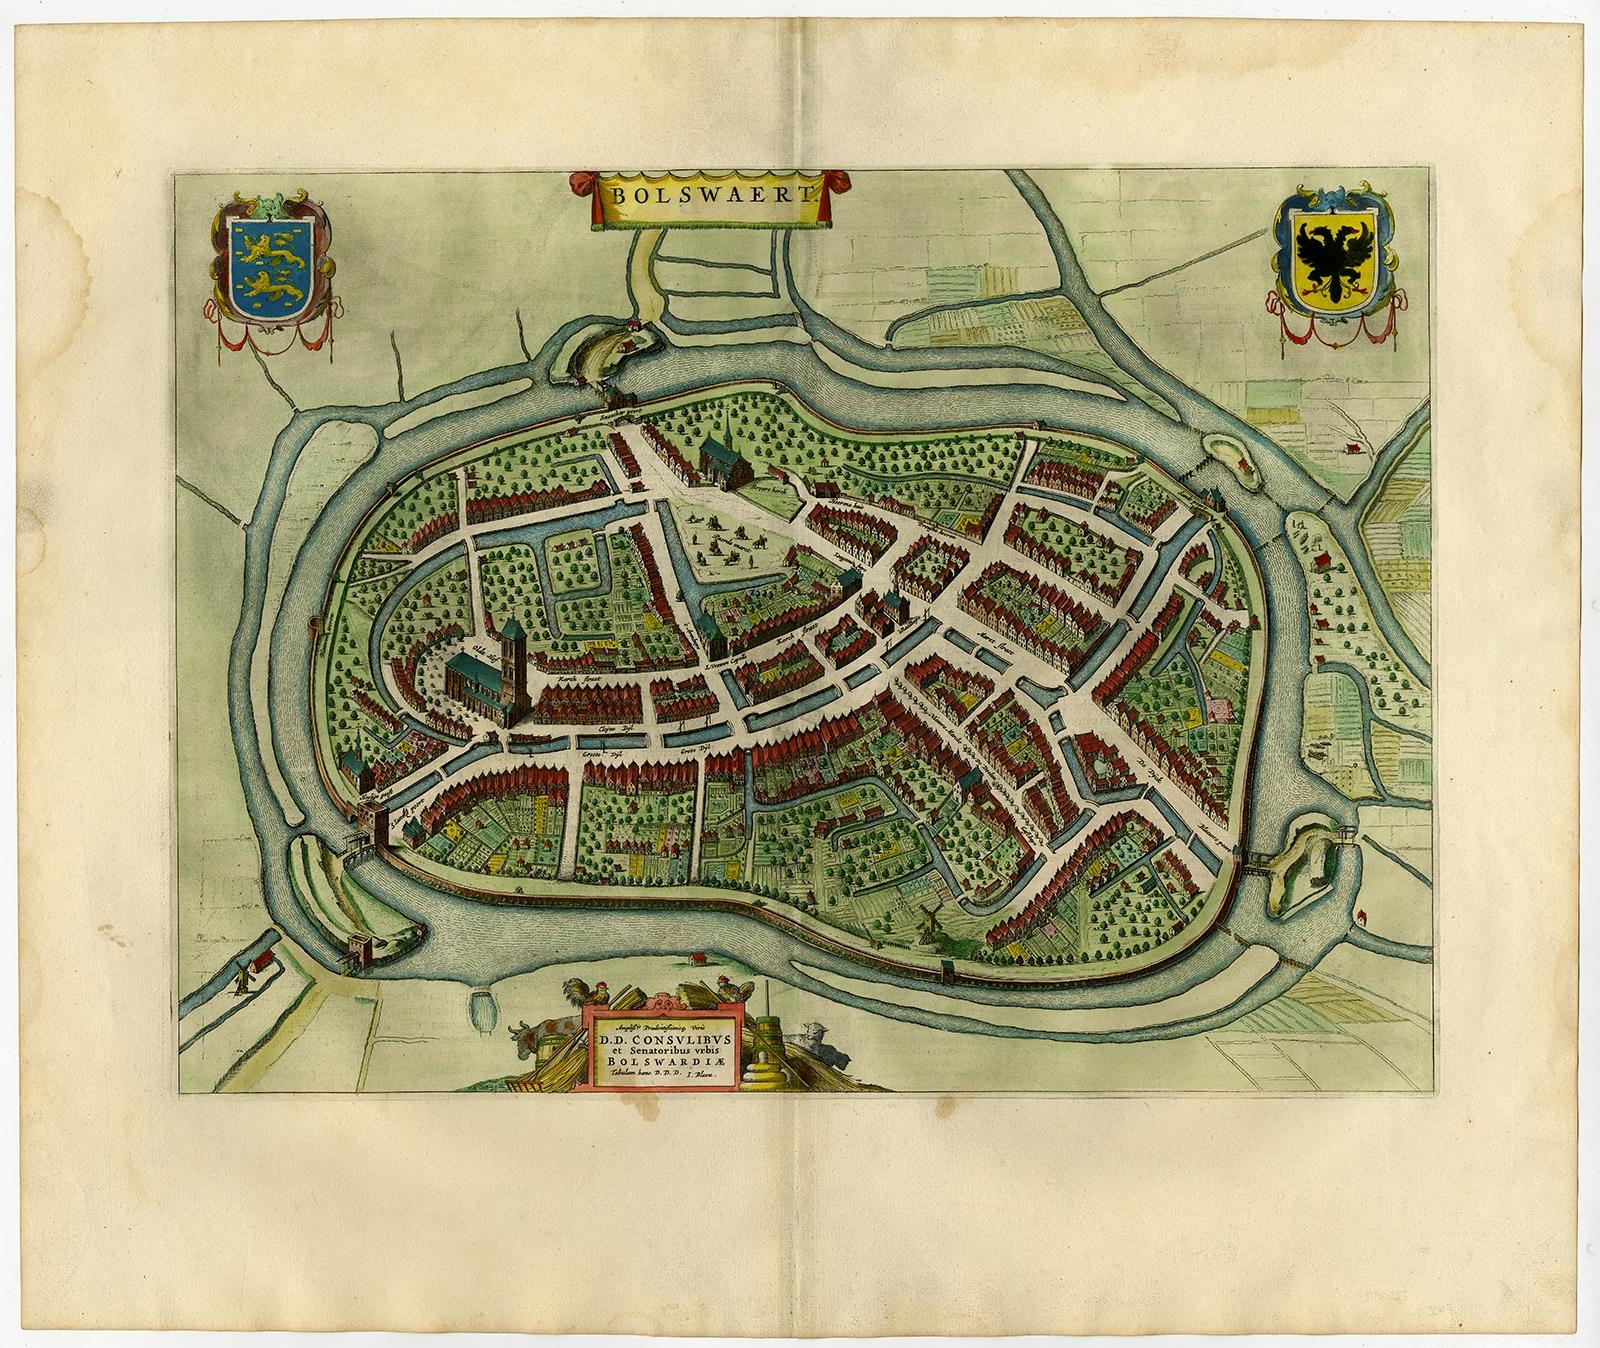 Antique print, titled: 'Bolswaert' - (Town plan of Bolsward). 

Plan of Bolsward in Friesland, the Netherlands. A cartouche and two coats of arms. From the town atlas 'Toneel der Steden', published by Joan Blaeu, Amsterdam: 1652. Dutch text on the